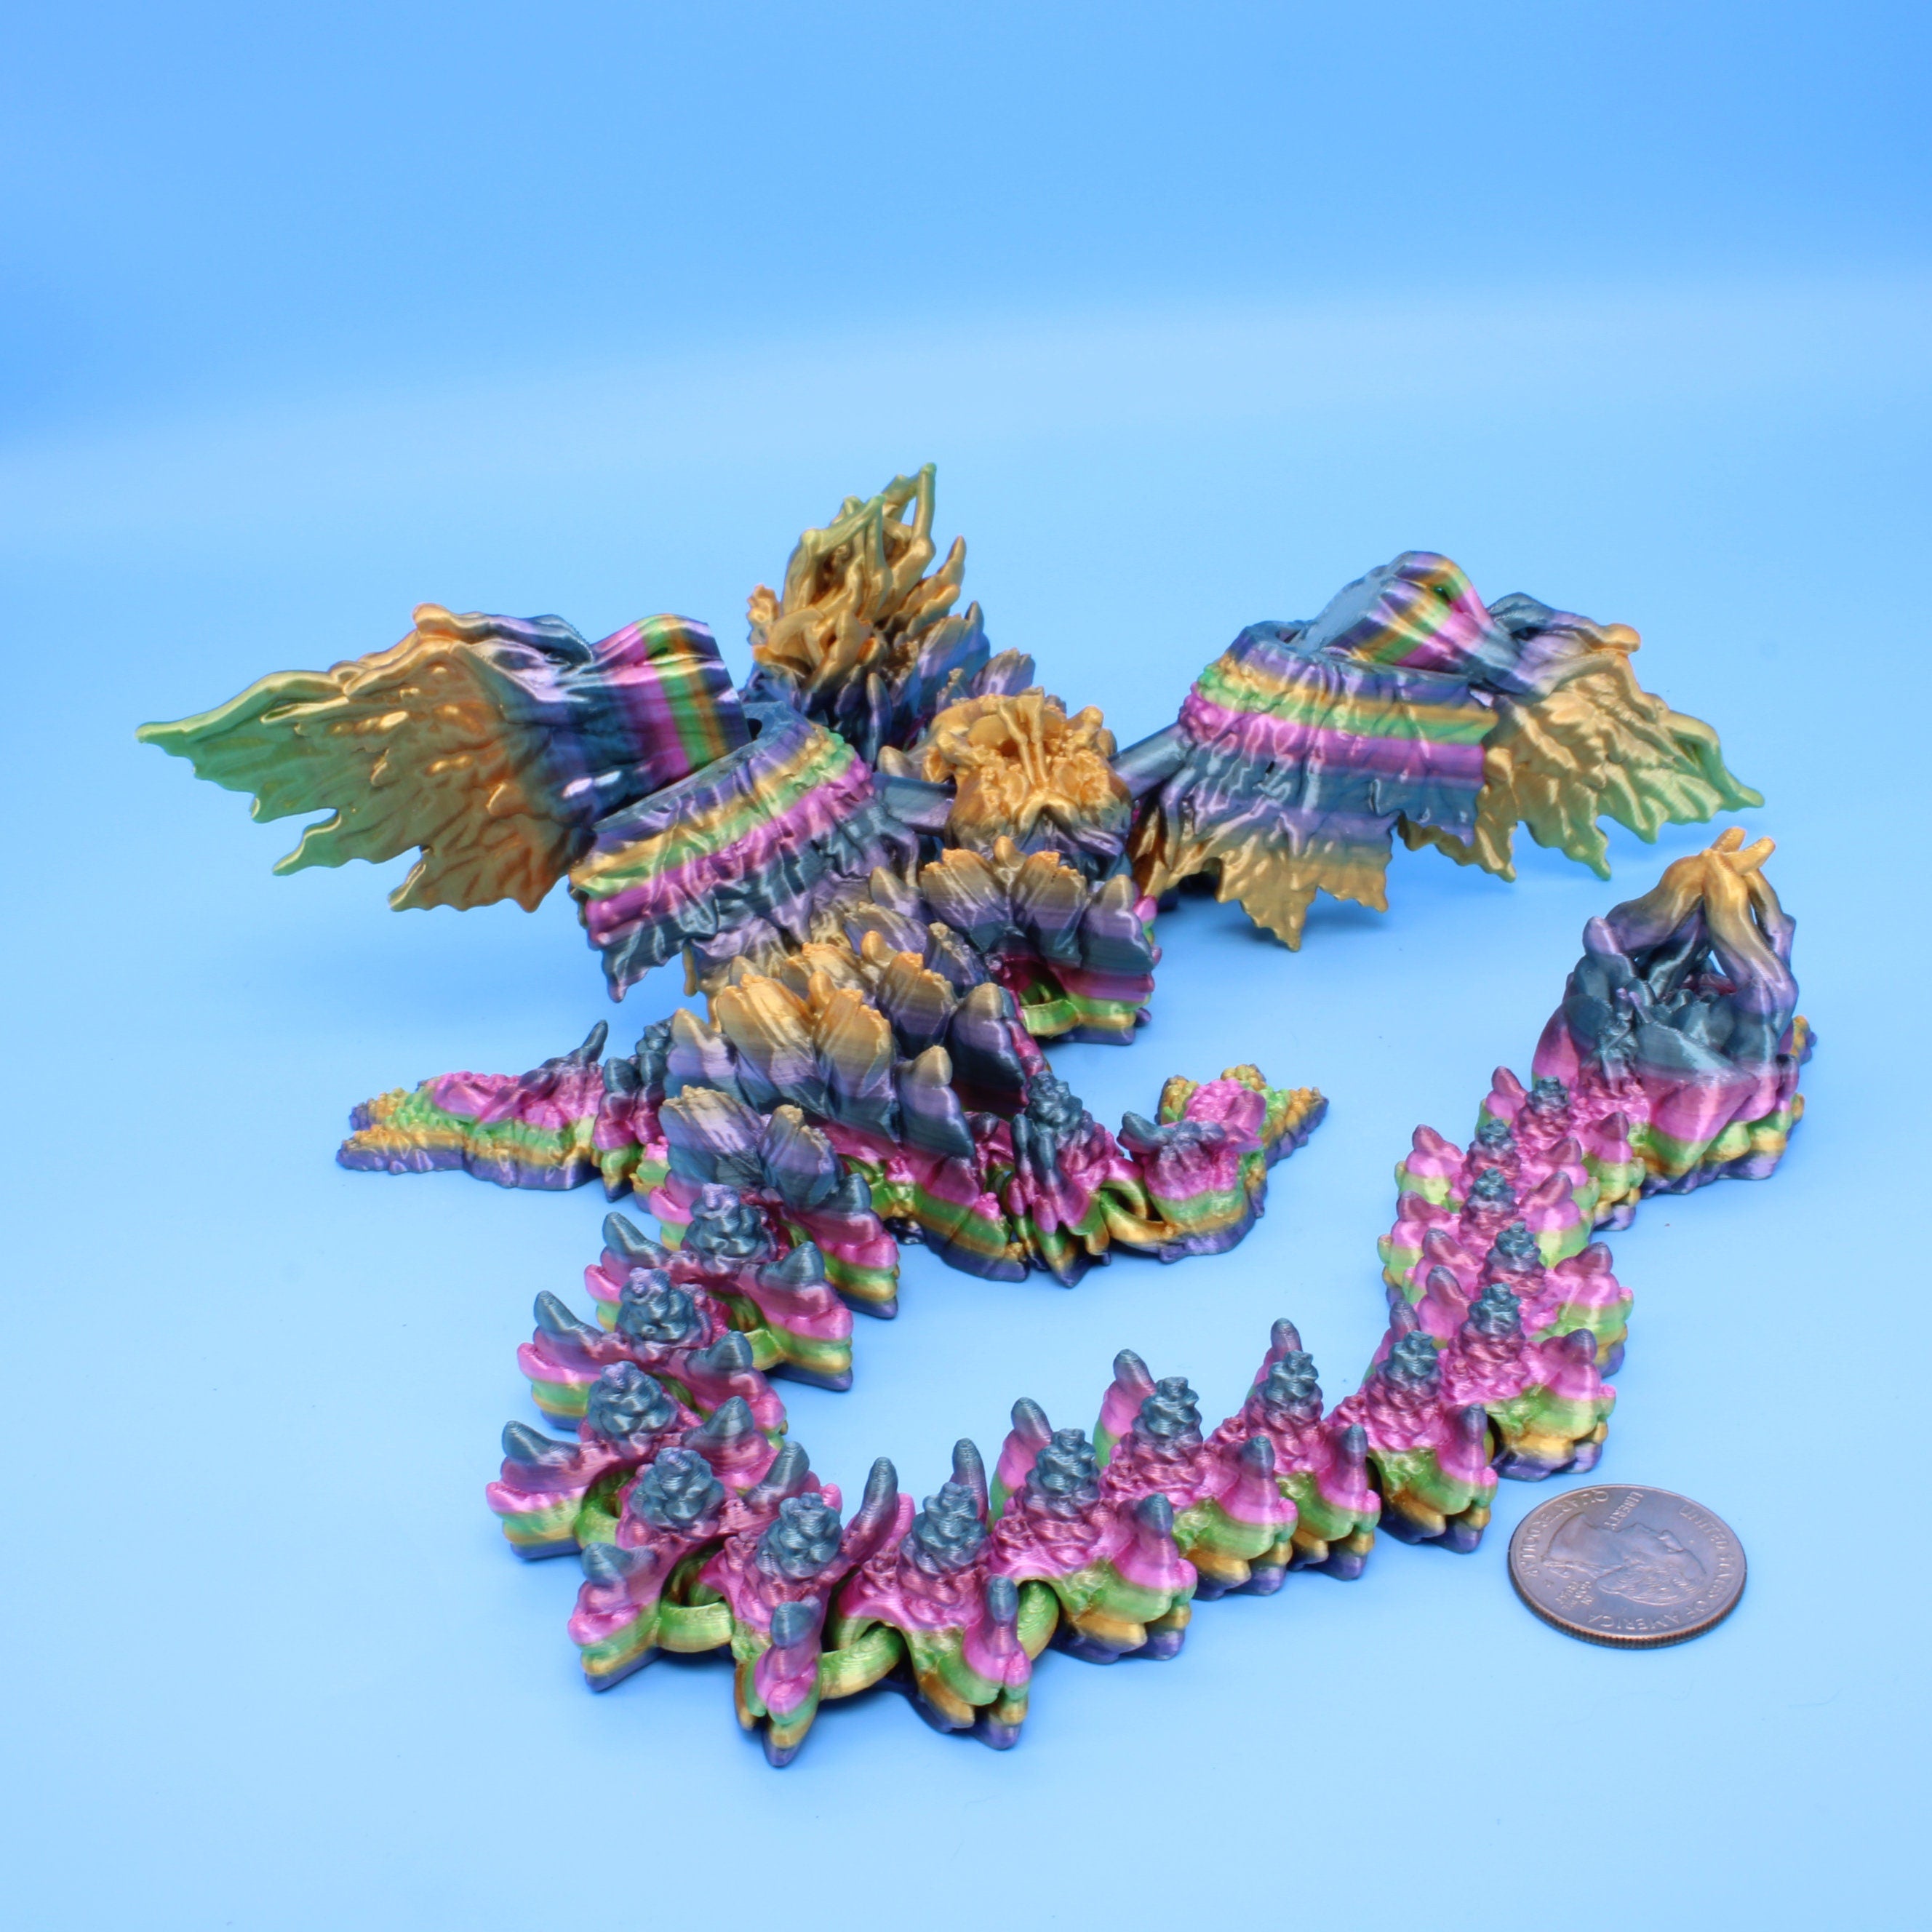 Autumn Wing Dragon | Rainbow | 3D printed | 19 in.